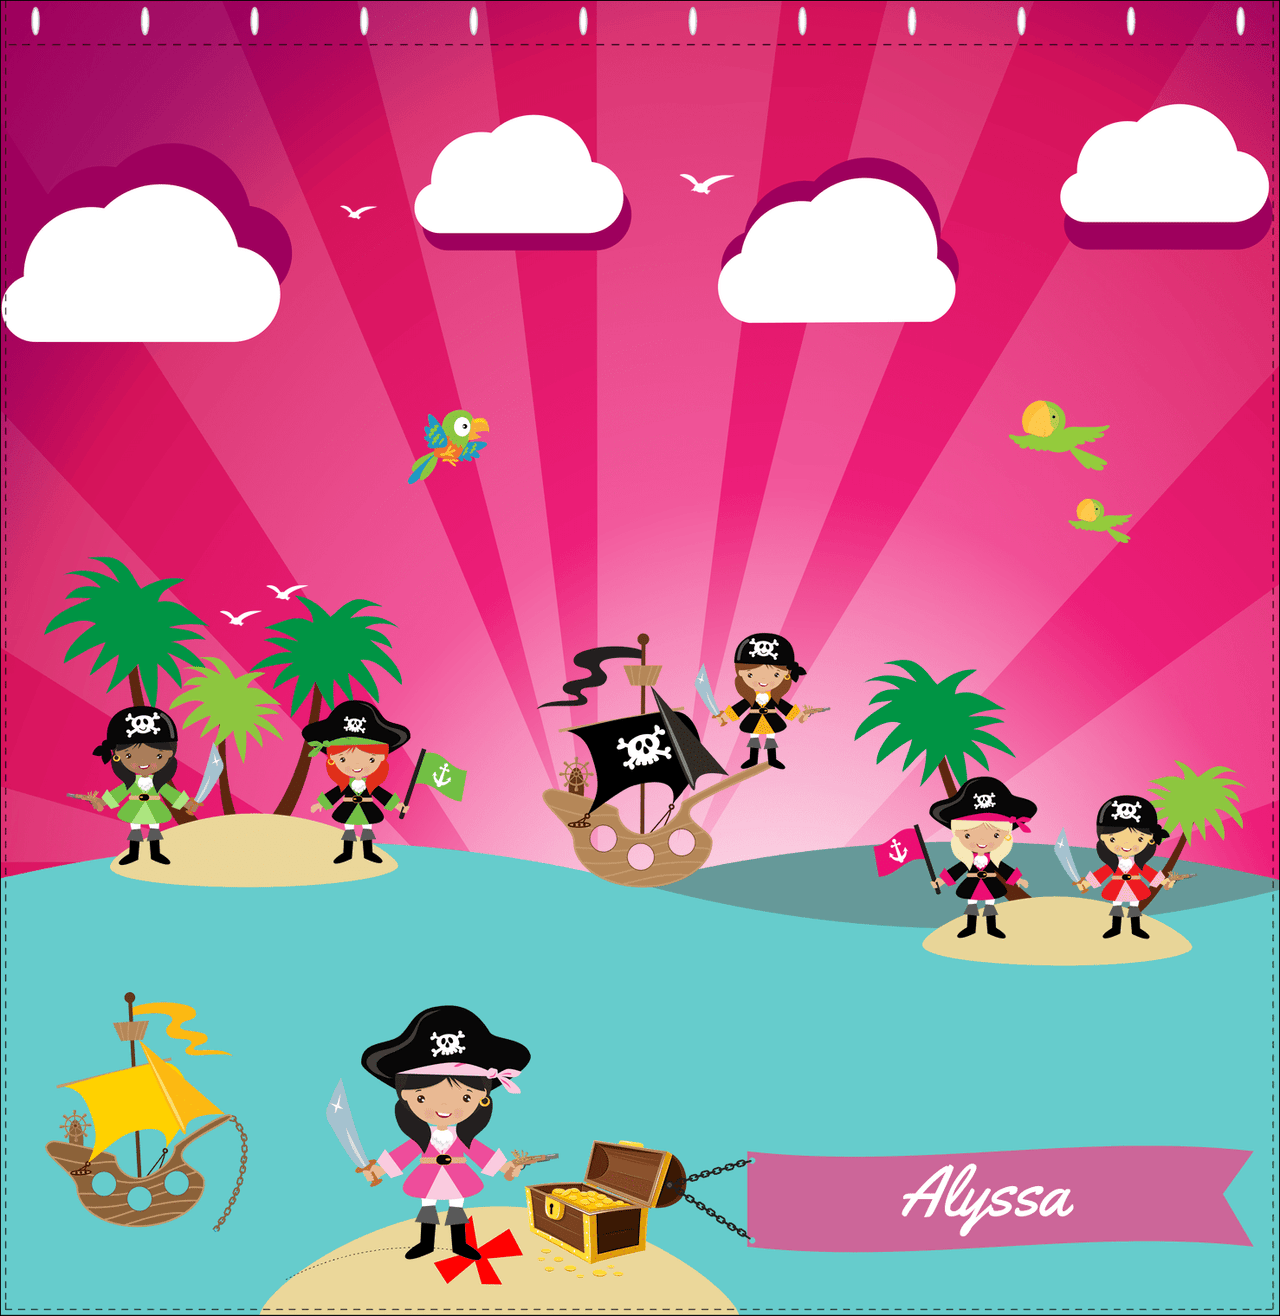 Personalized Pirate Shower Curtain XXII - Pink Background - Black Hair Girl with Sword - Decorate View